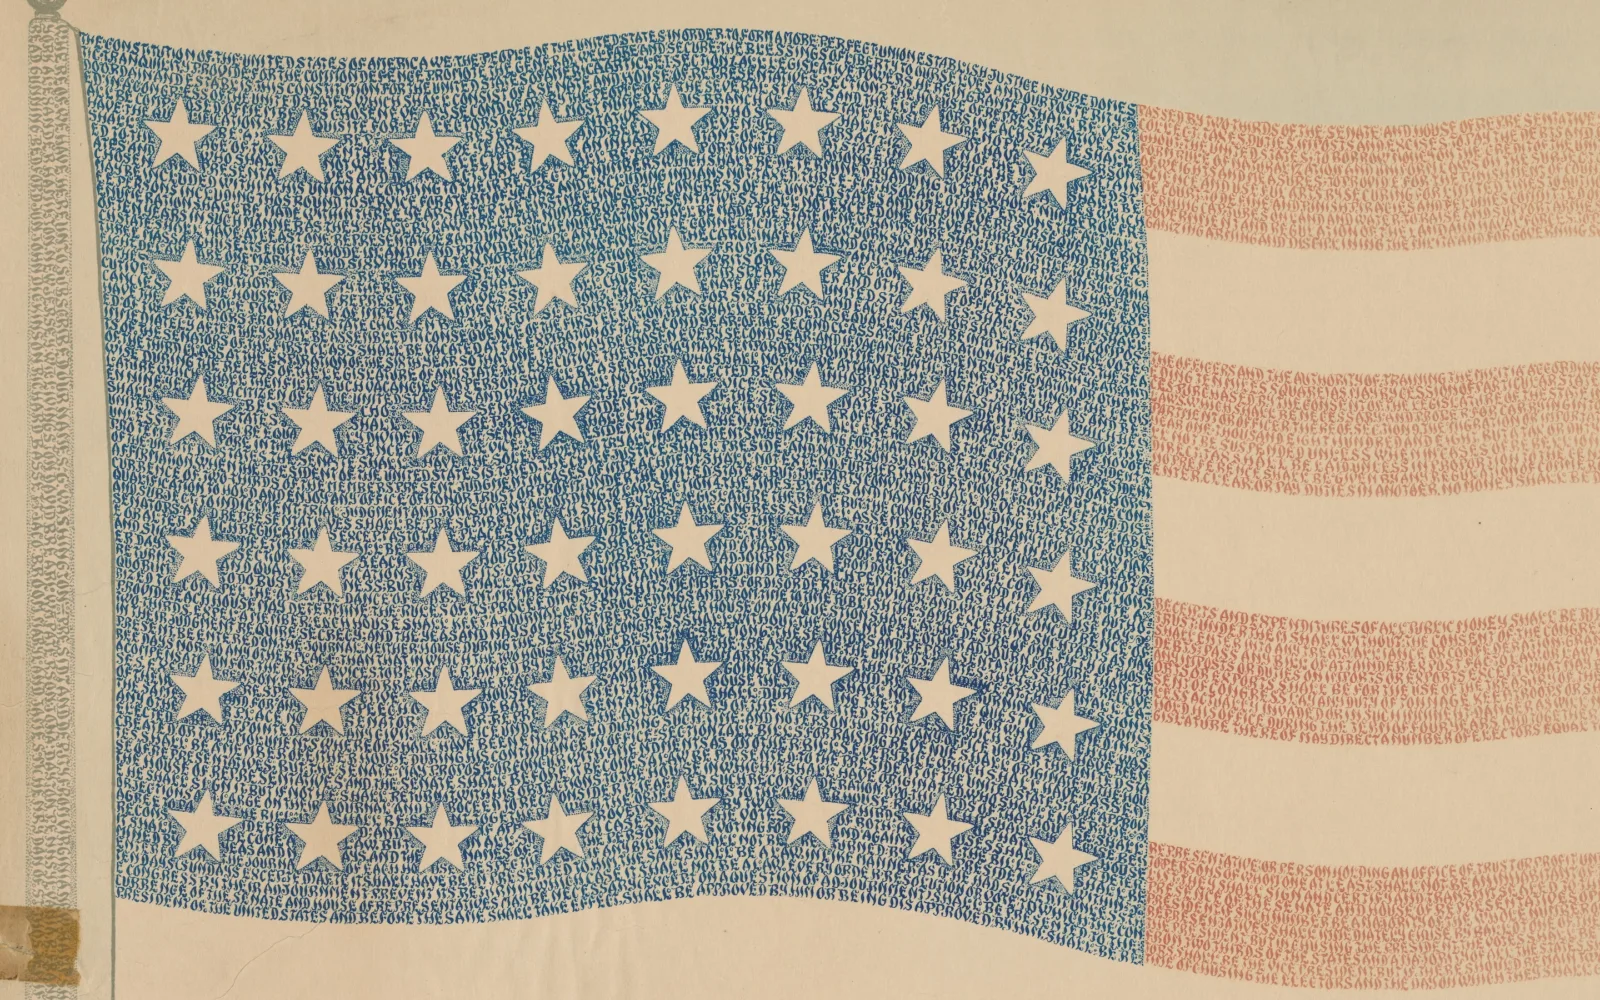 Portion of a calligraphic piece made by NeJame. NeJame lettered the US Constitution in the shape of the US flag. Different portions of the piece are in red and blue.